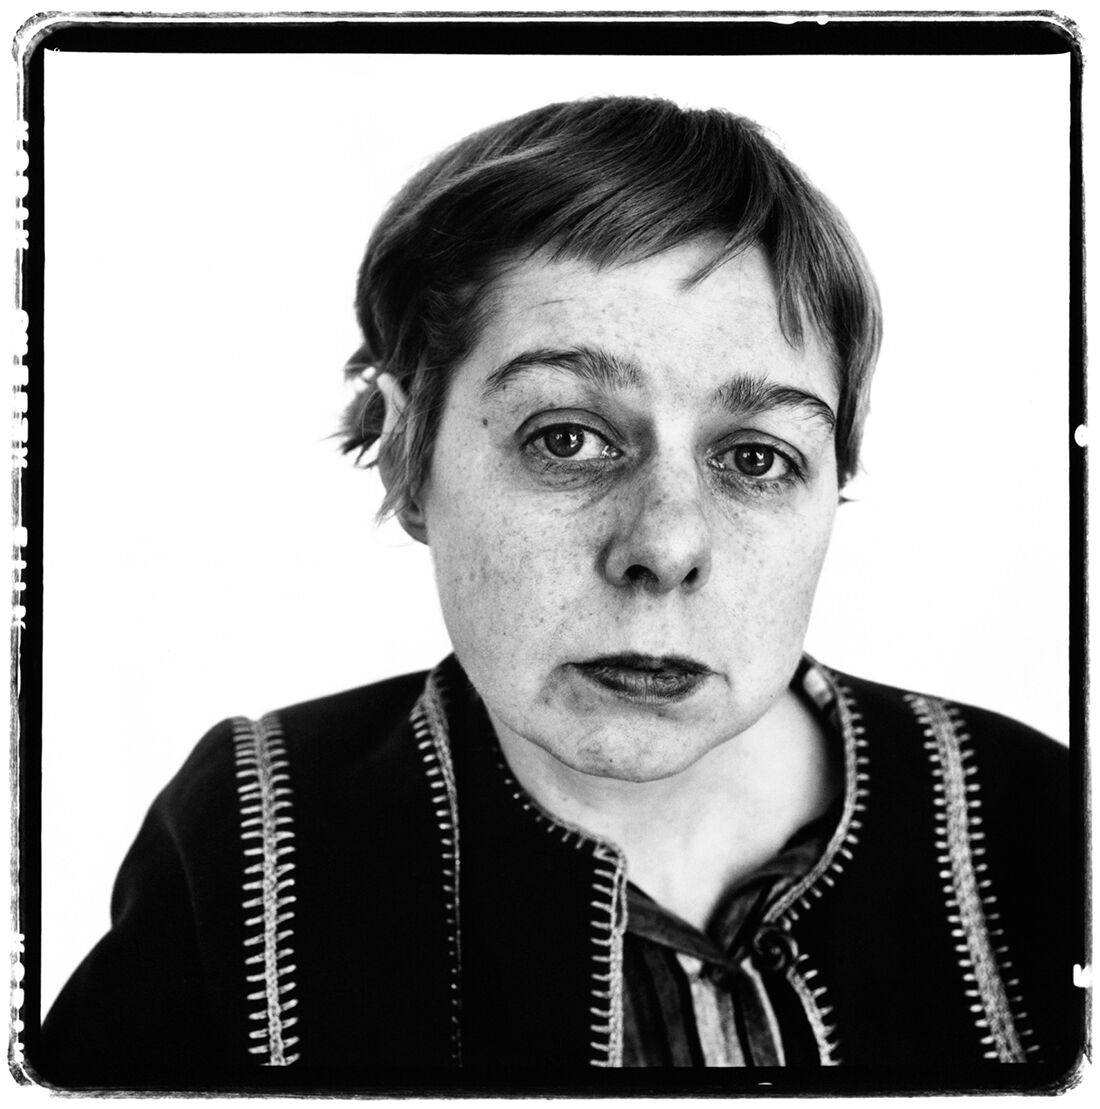 my autobiography of carson mccullers a memoir